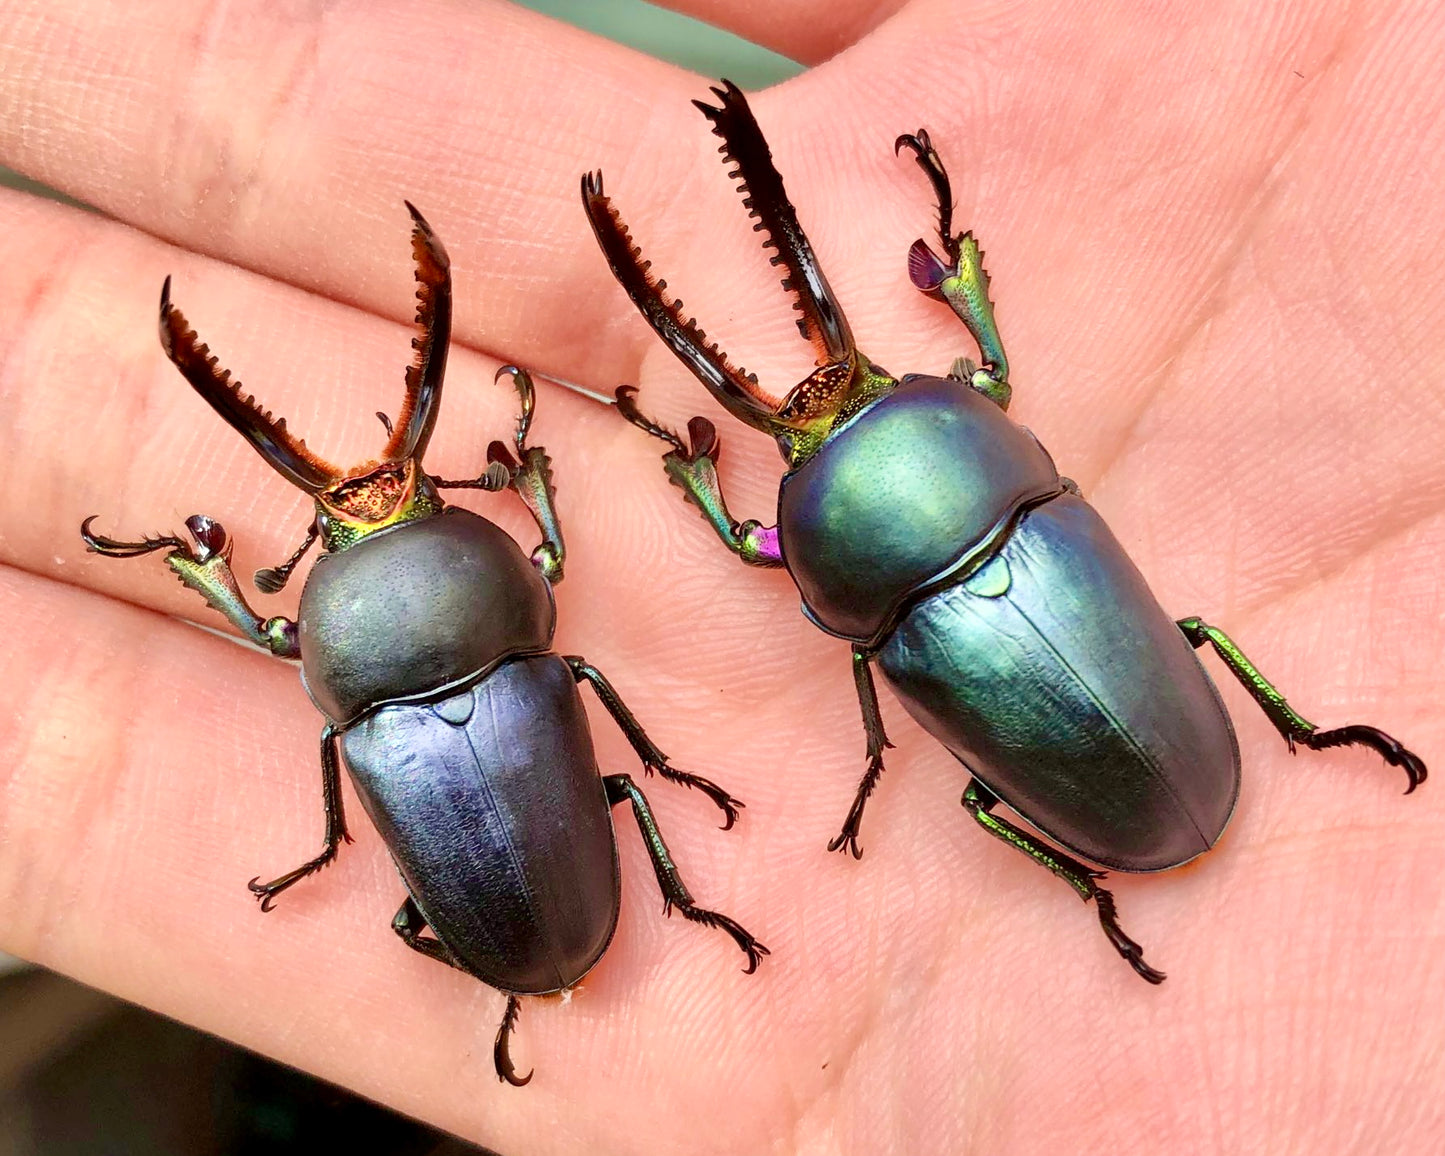 ⨂ ADULTS - "Sapphire" Jewel Stag Beetle, (Lamprima adolphinae)